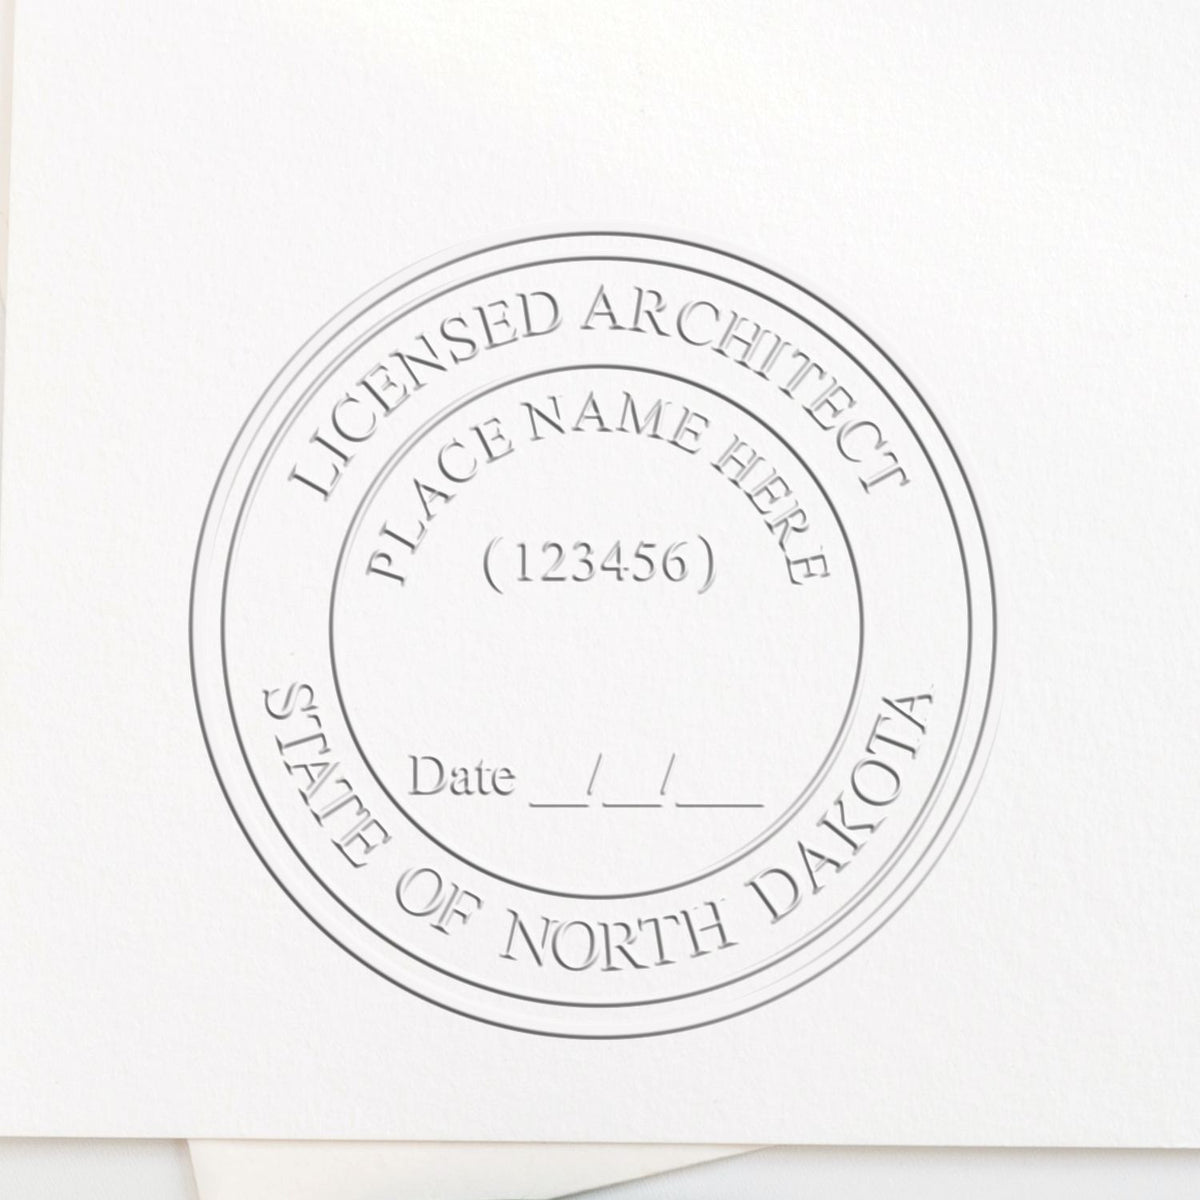 An alternative view of the State of North Dakota Long Reach Architectural Embossing Seal stamped on a sheet of paper showing the image in use